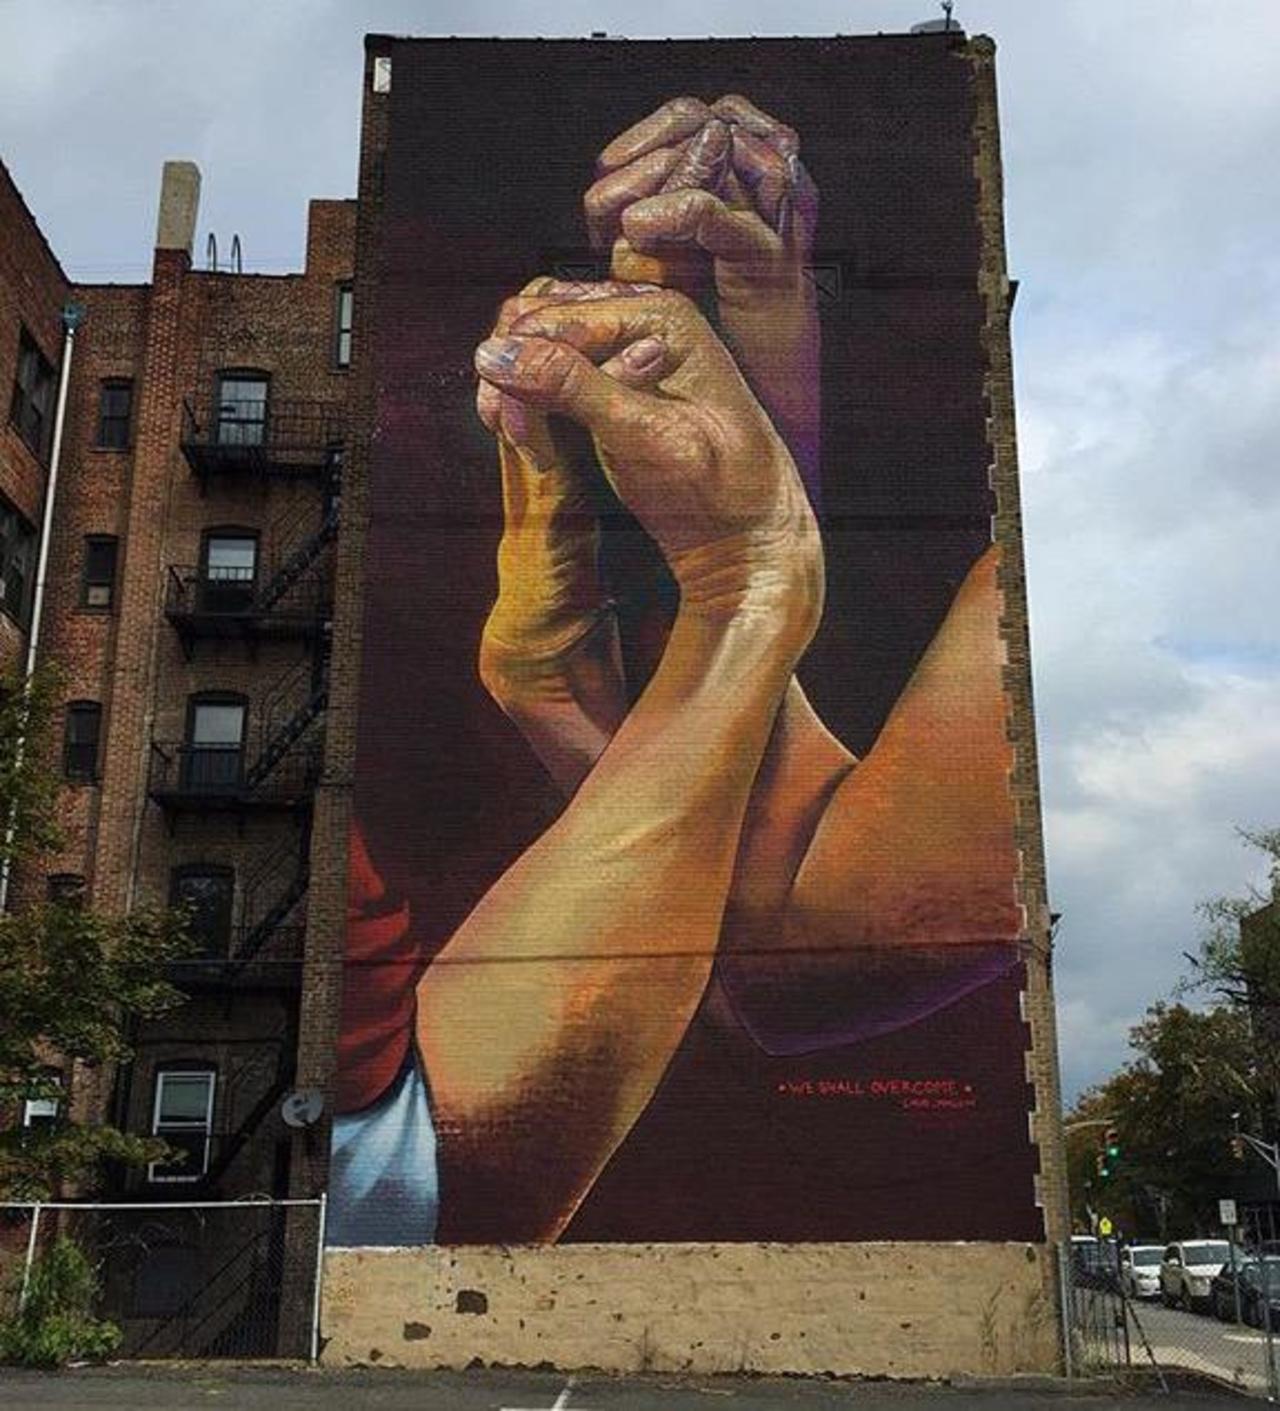 New Street Art by CaseMaclaim in Jersey City for the TheBKcollective 

#art #graffiti #mural #streetart http://t.co/rXOvrXQFgA